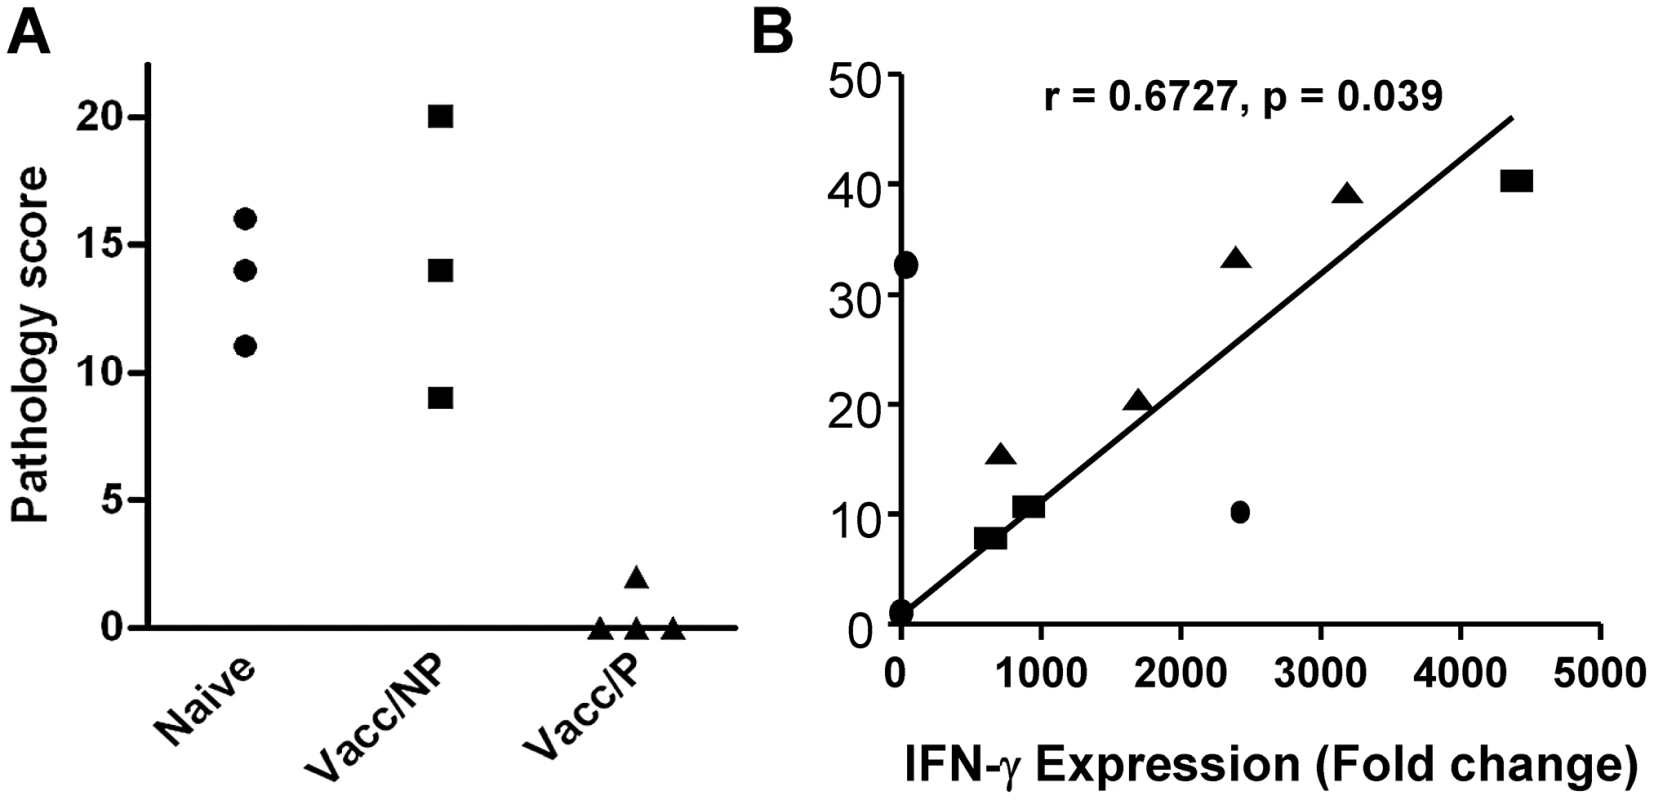 Protection and <i>in vitro</i> IFN-γ responses prior to challenge.